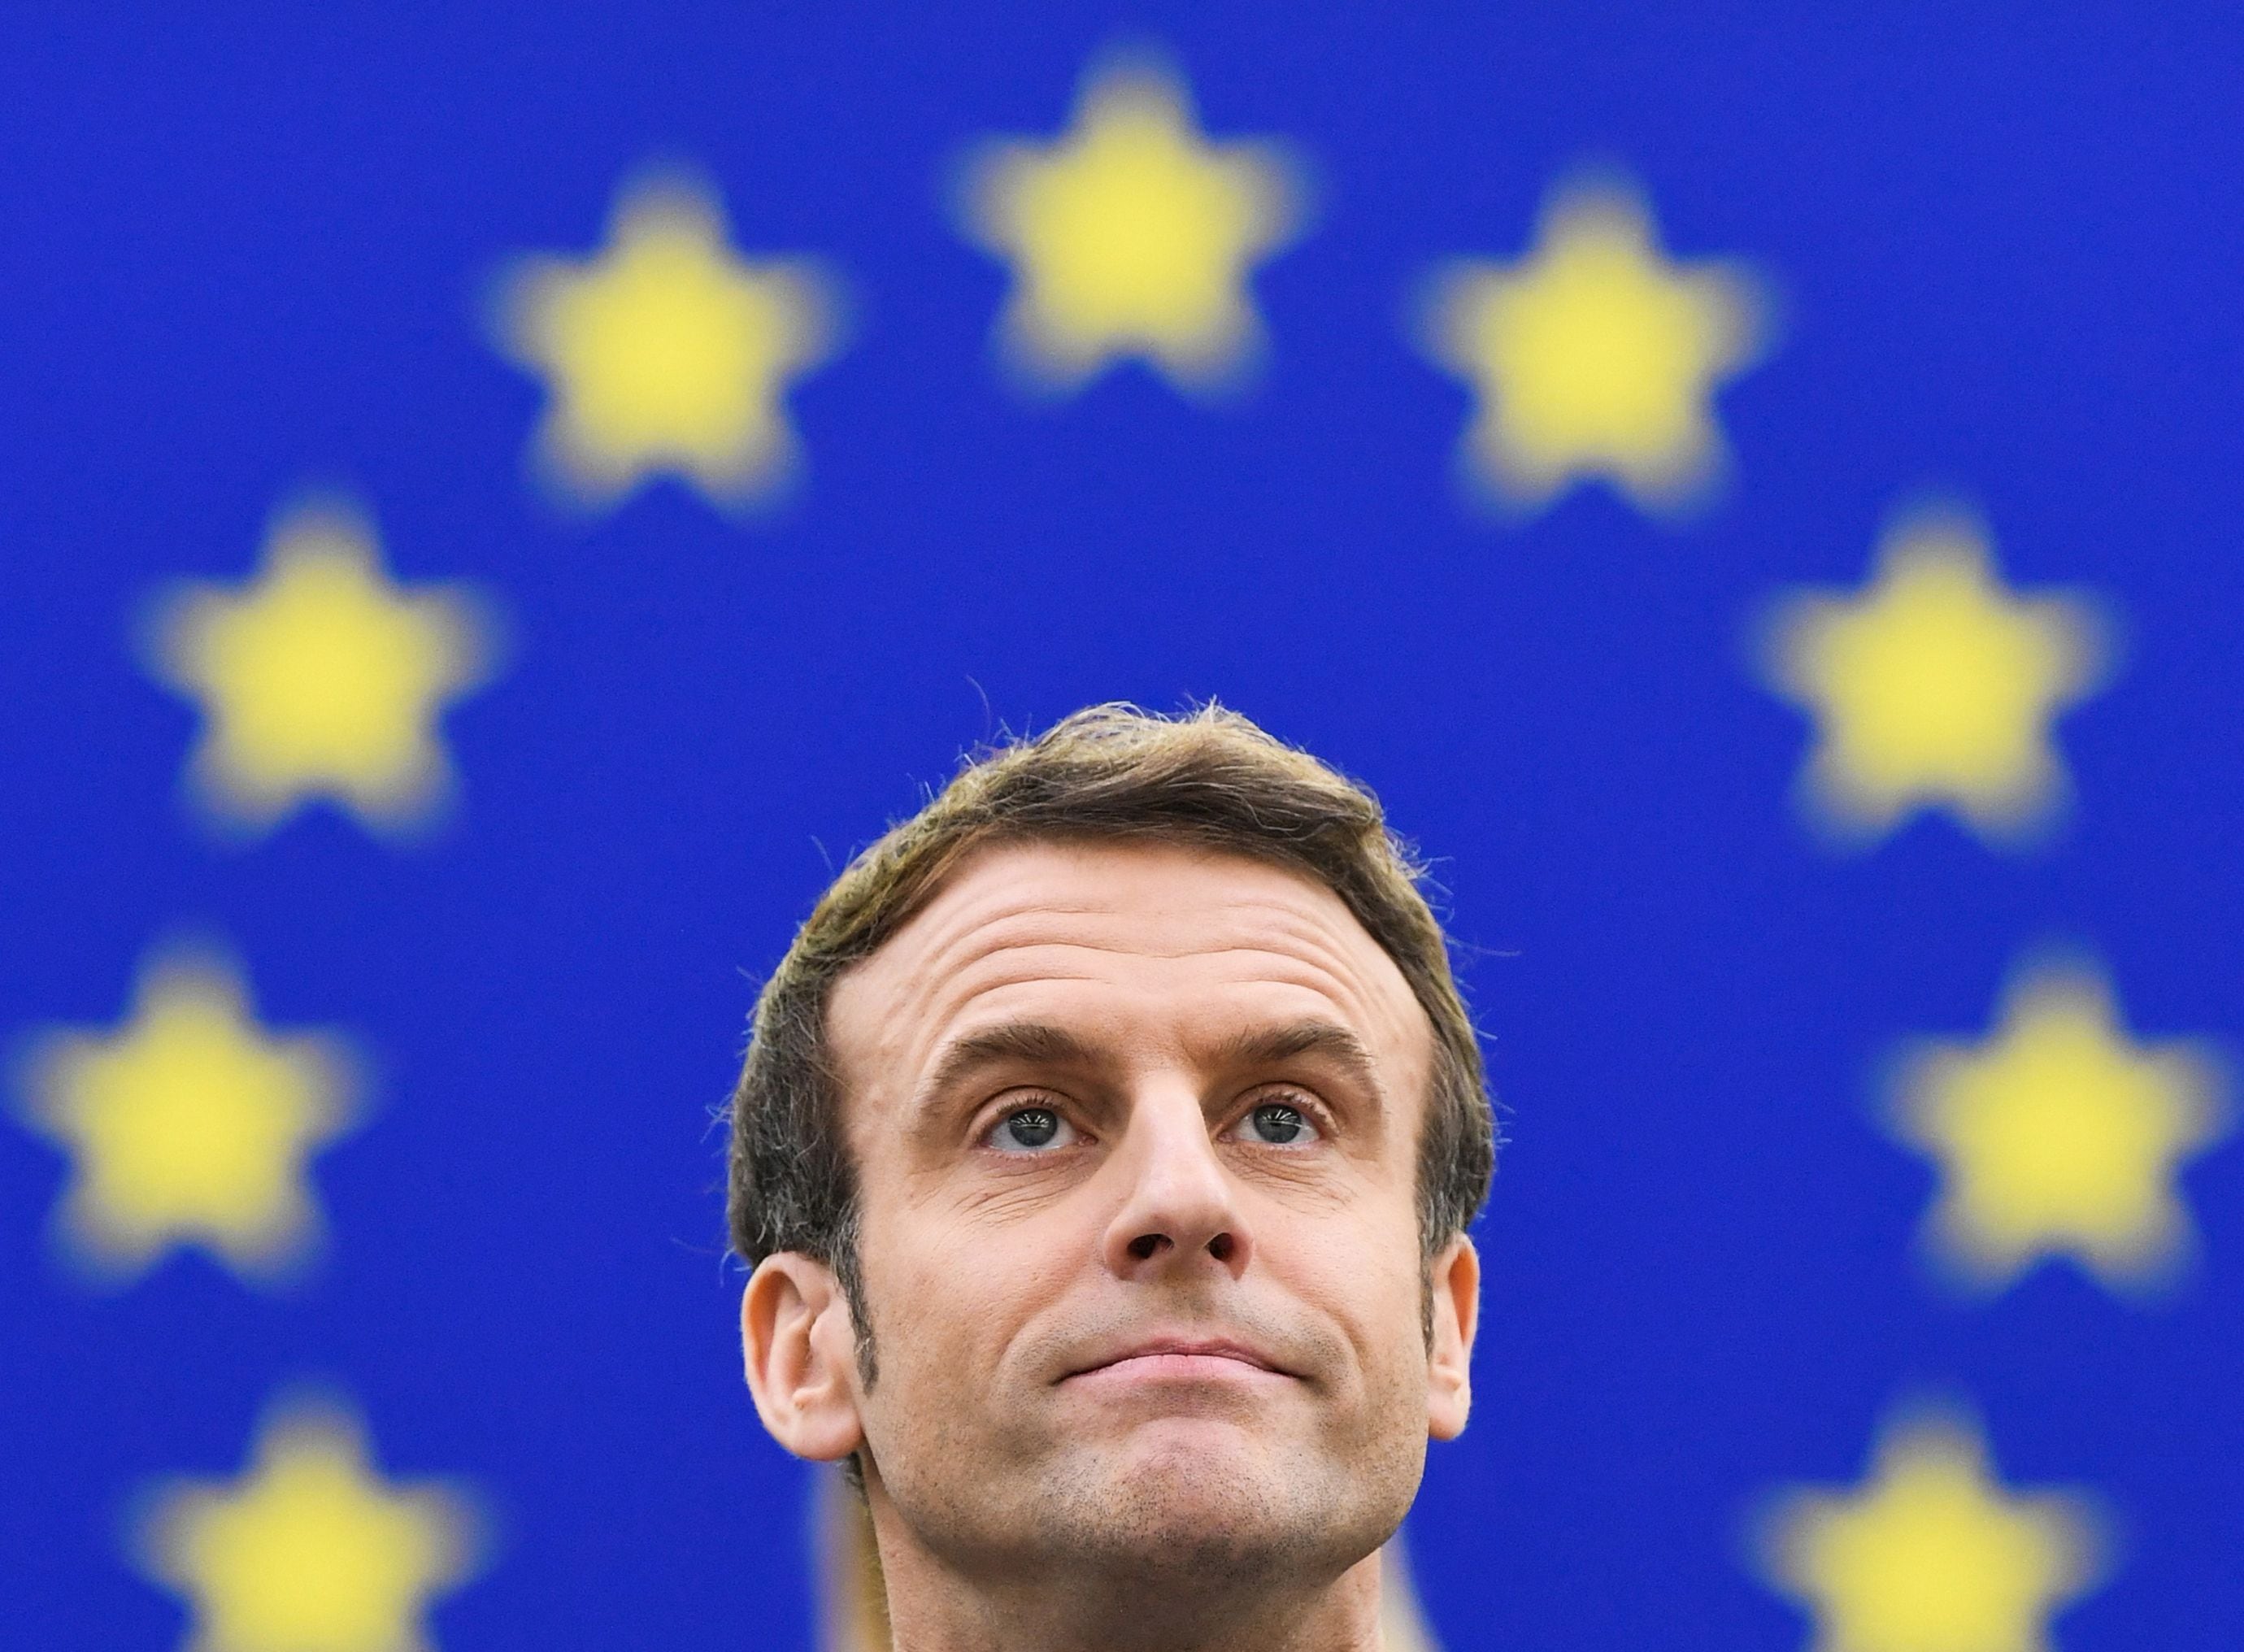 President Emmanuel Macron wants to become the visible head of the European Union.  In his proposals he continues to promote Europeanism as the axis of his mandate.  (Photo by BERTRAND GUAY / POOL / AFP)